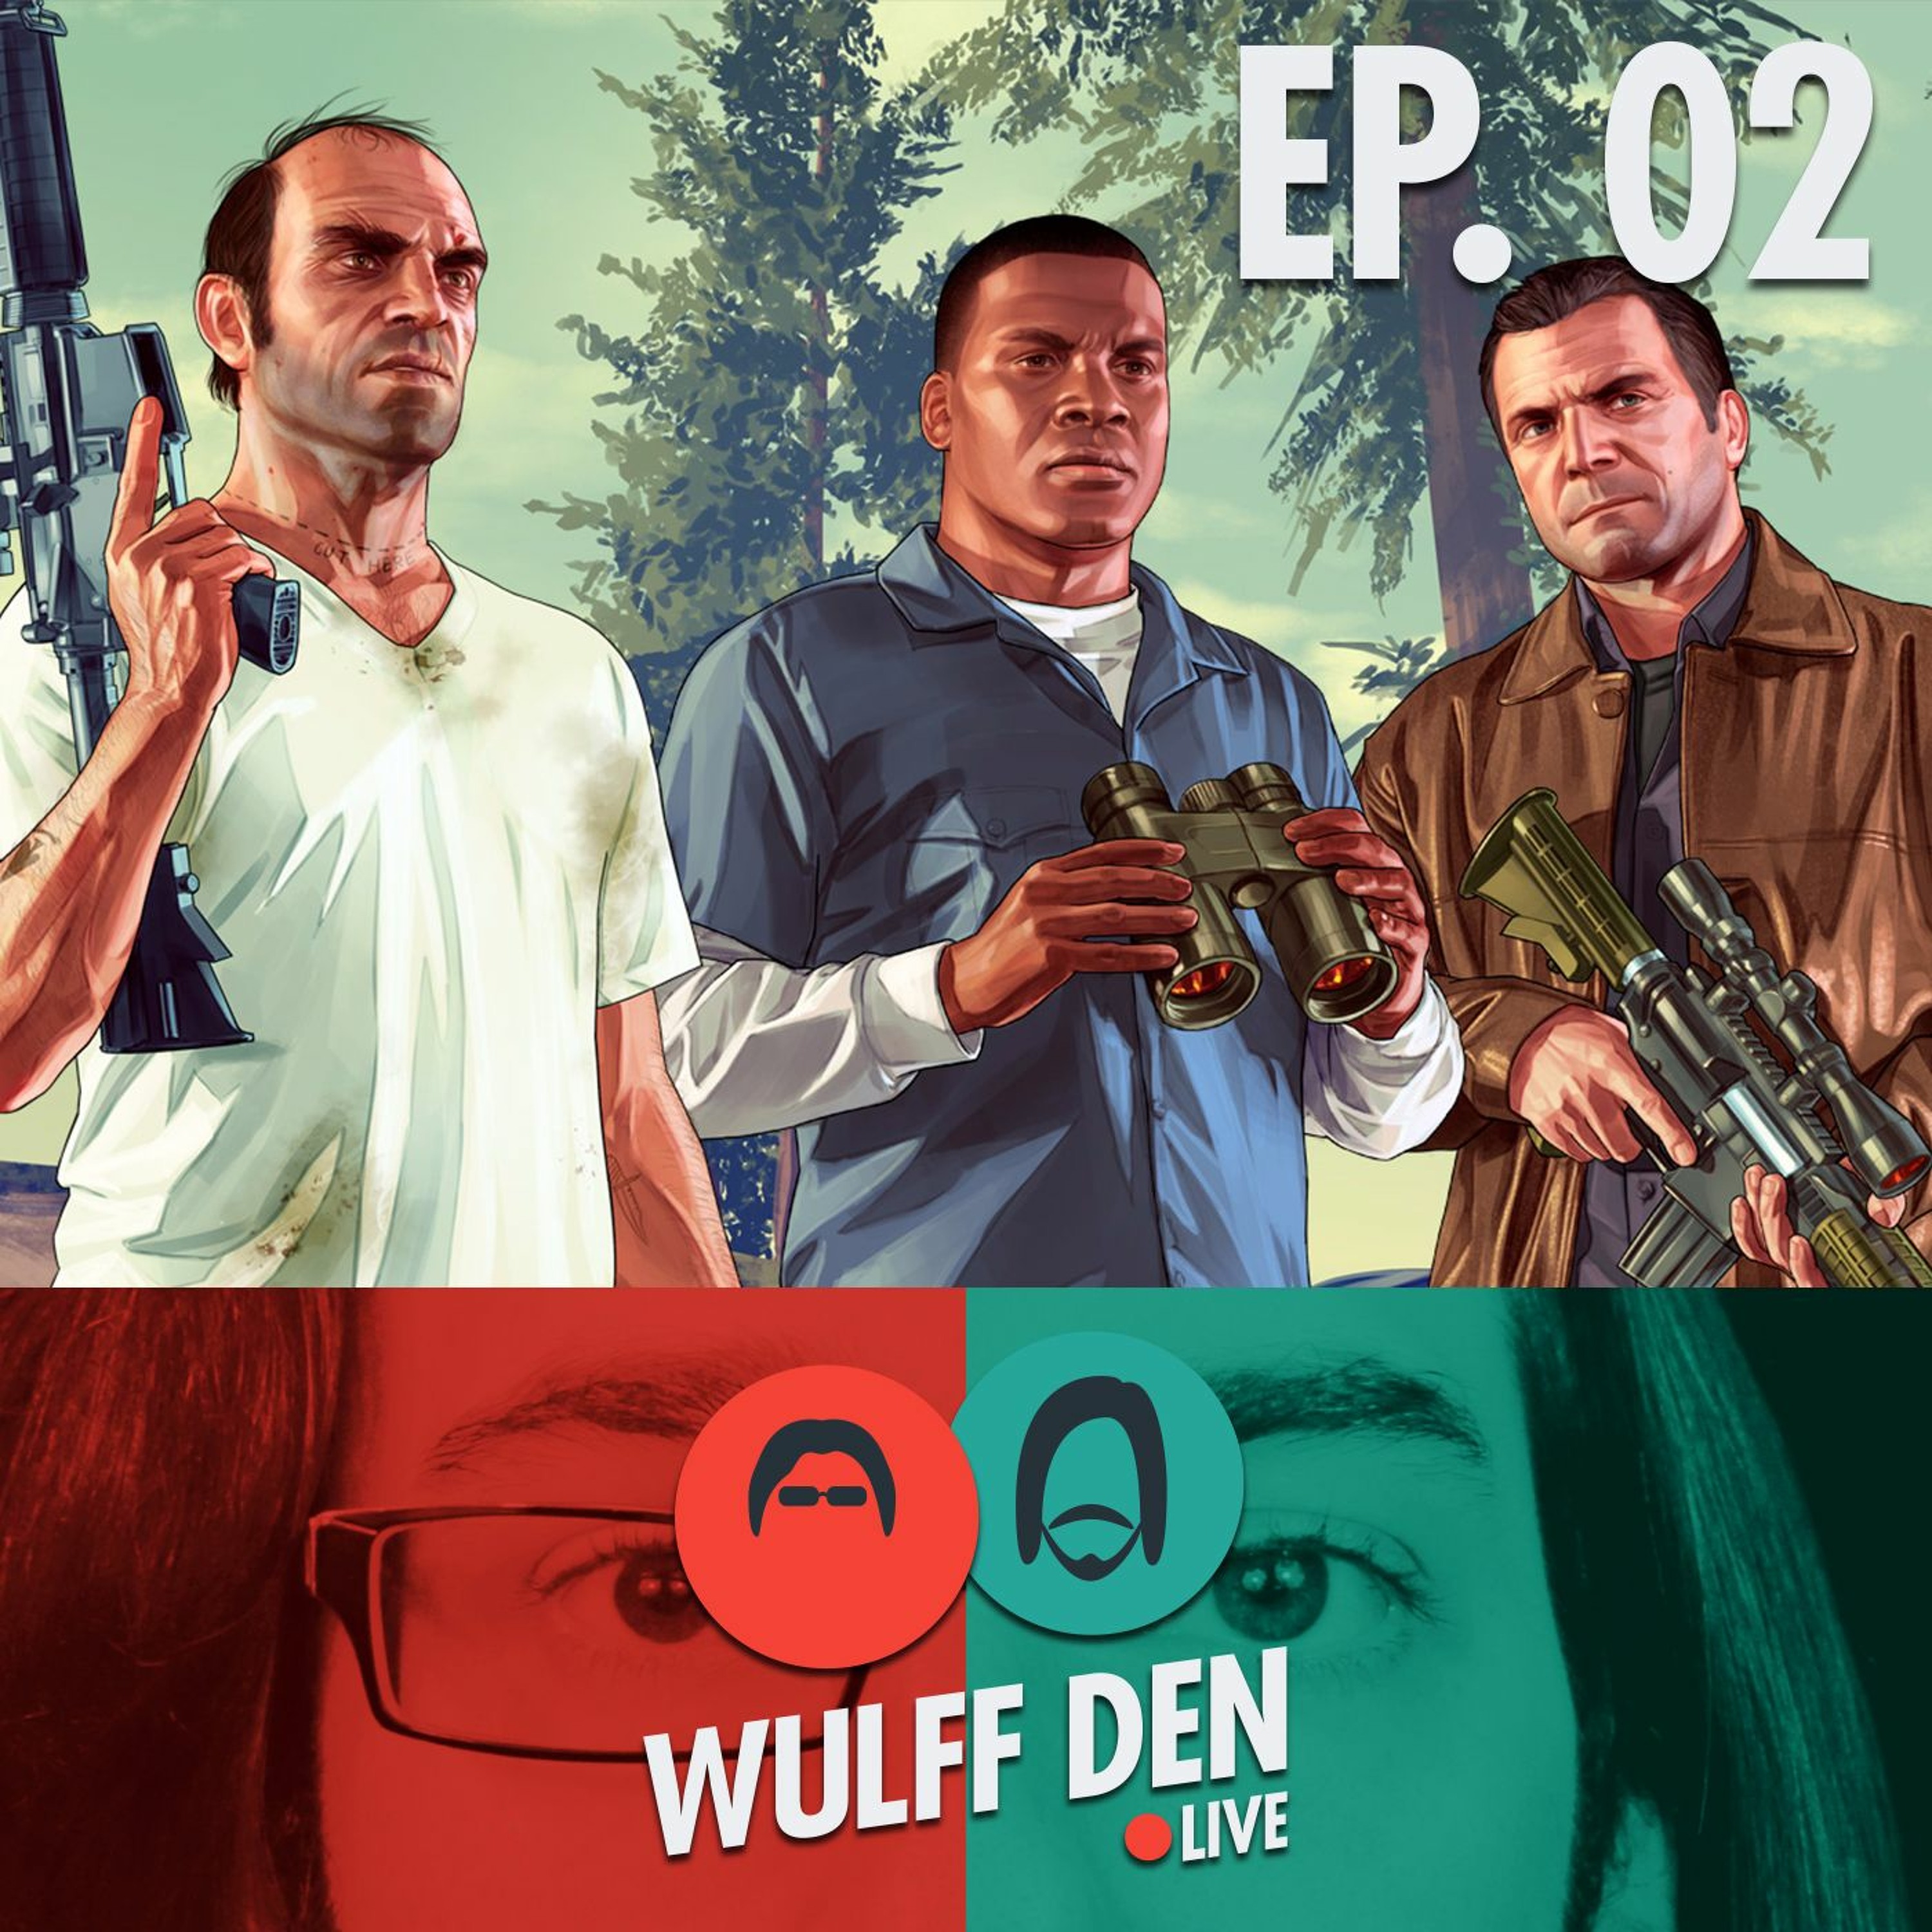 Wulff Den Live Ep 2 - Amazon Prime Games, GTA Producer Leaves Rockstar and Movies of 2016